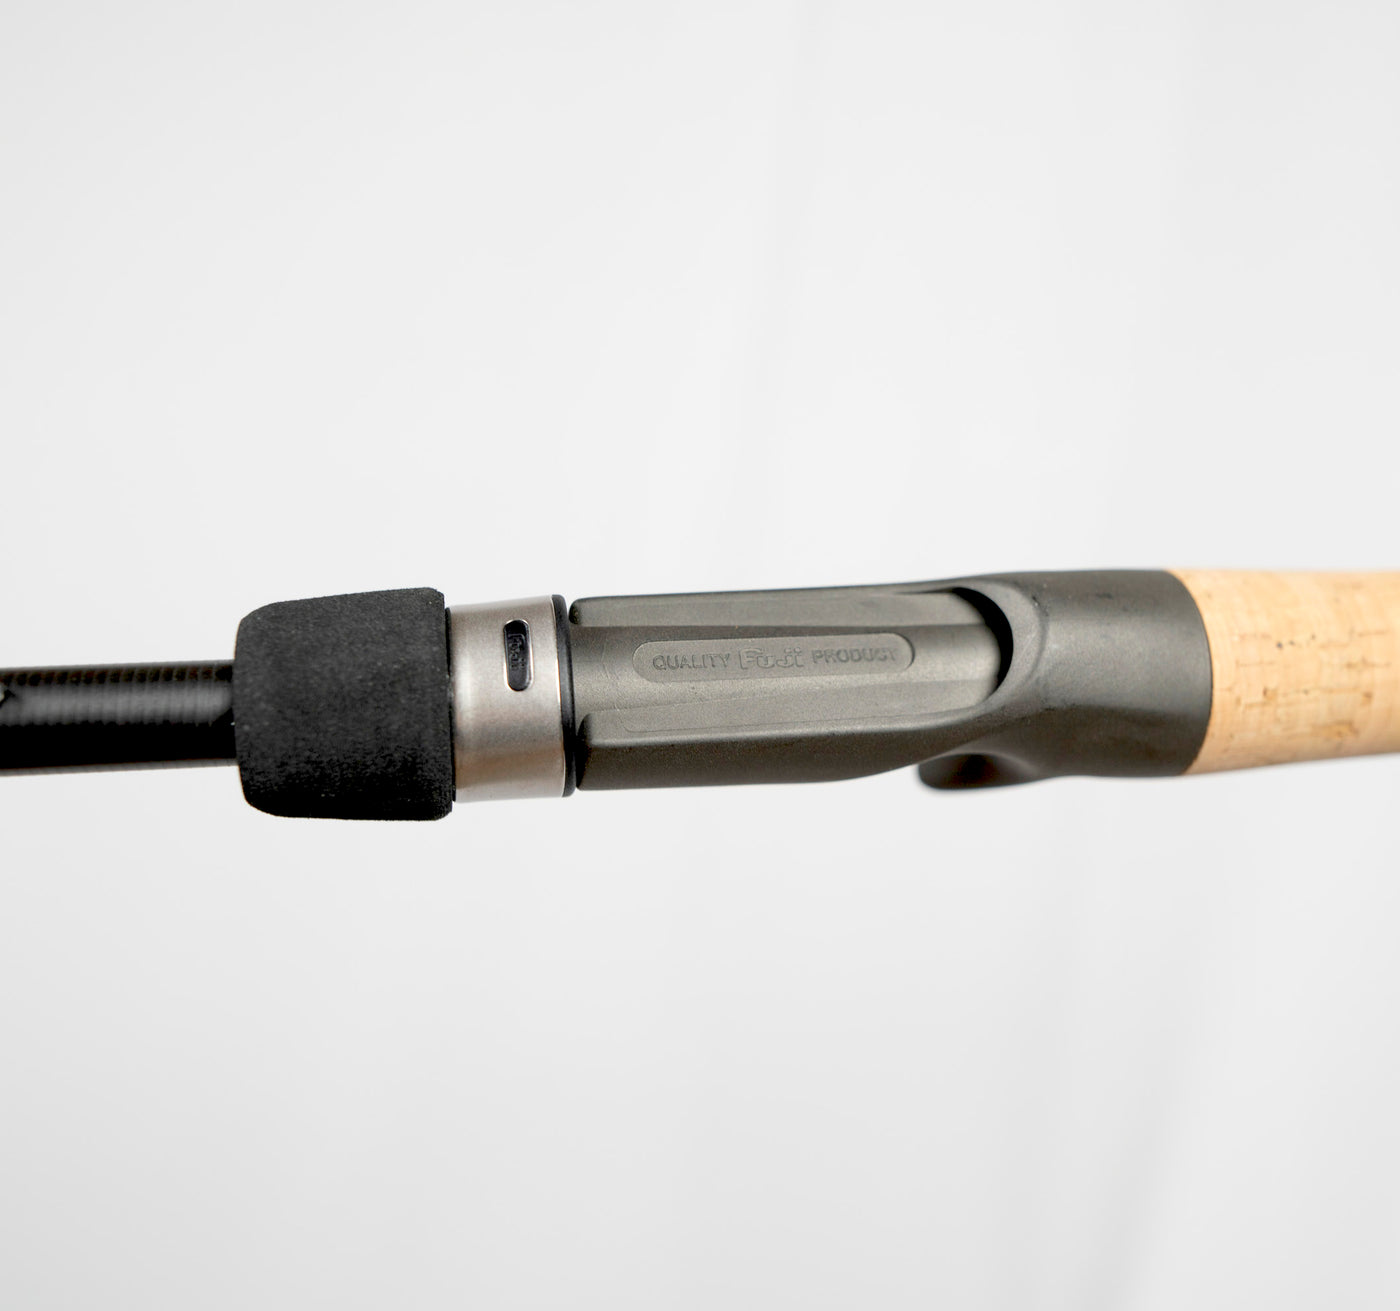 ELEMENT Worm and Jig Rod